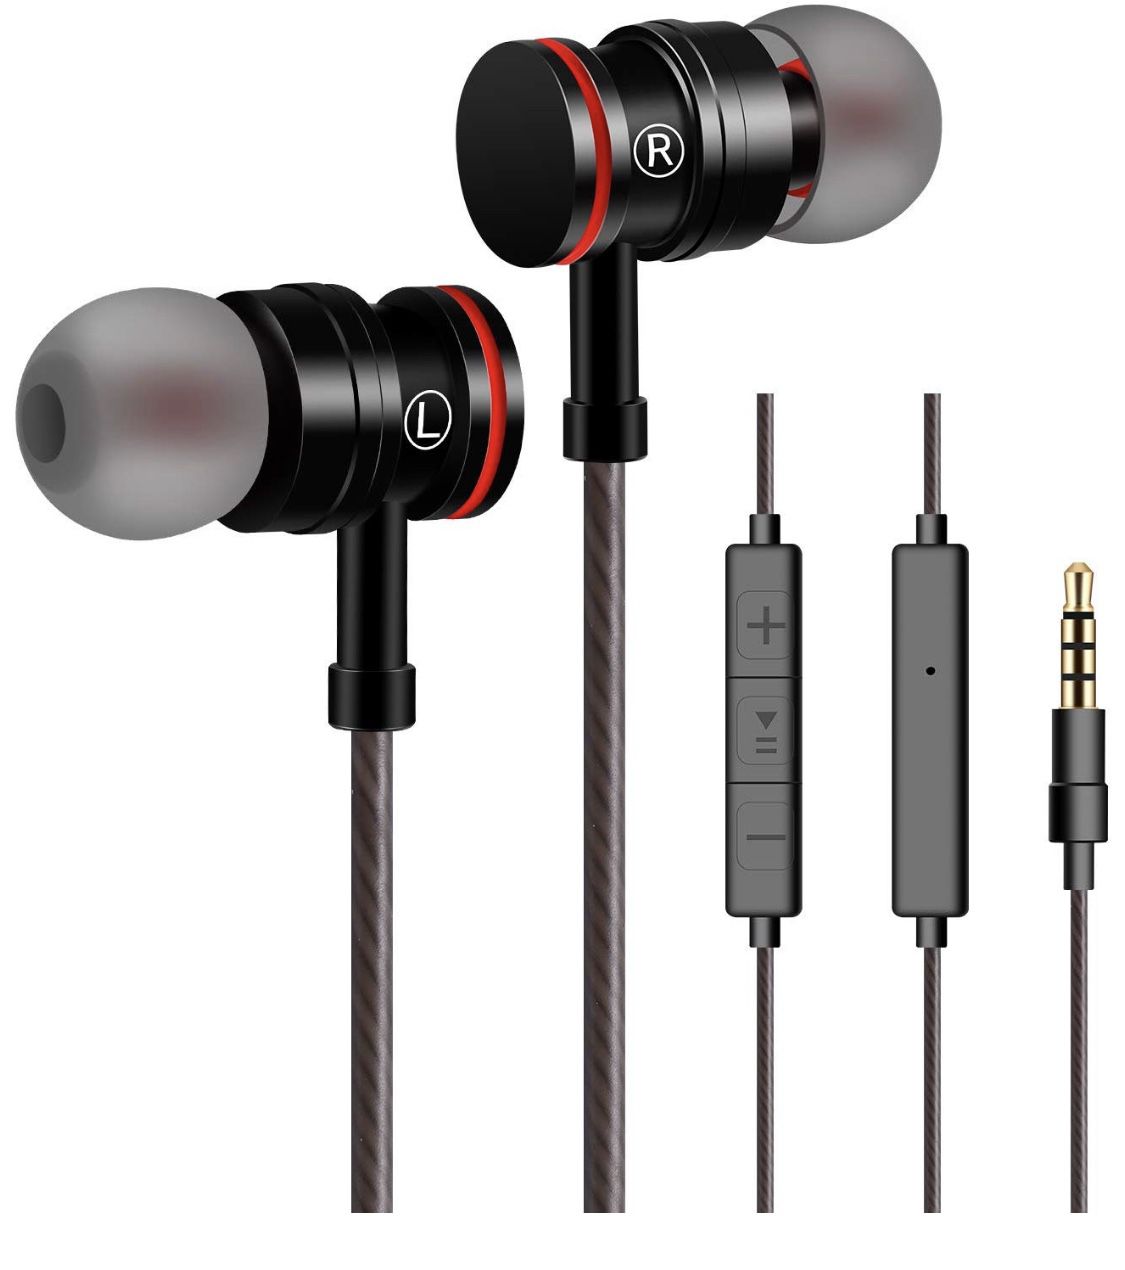 9-33. Earphones, in Ear Headphones, Earbuds with Microphone and Volume Control, Wired Headphones Stereo Sound for Samsung Smartphones and Tablets 3.5